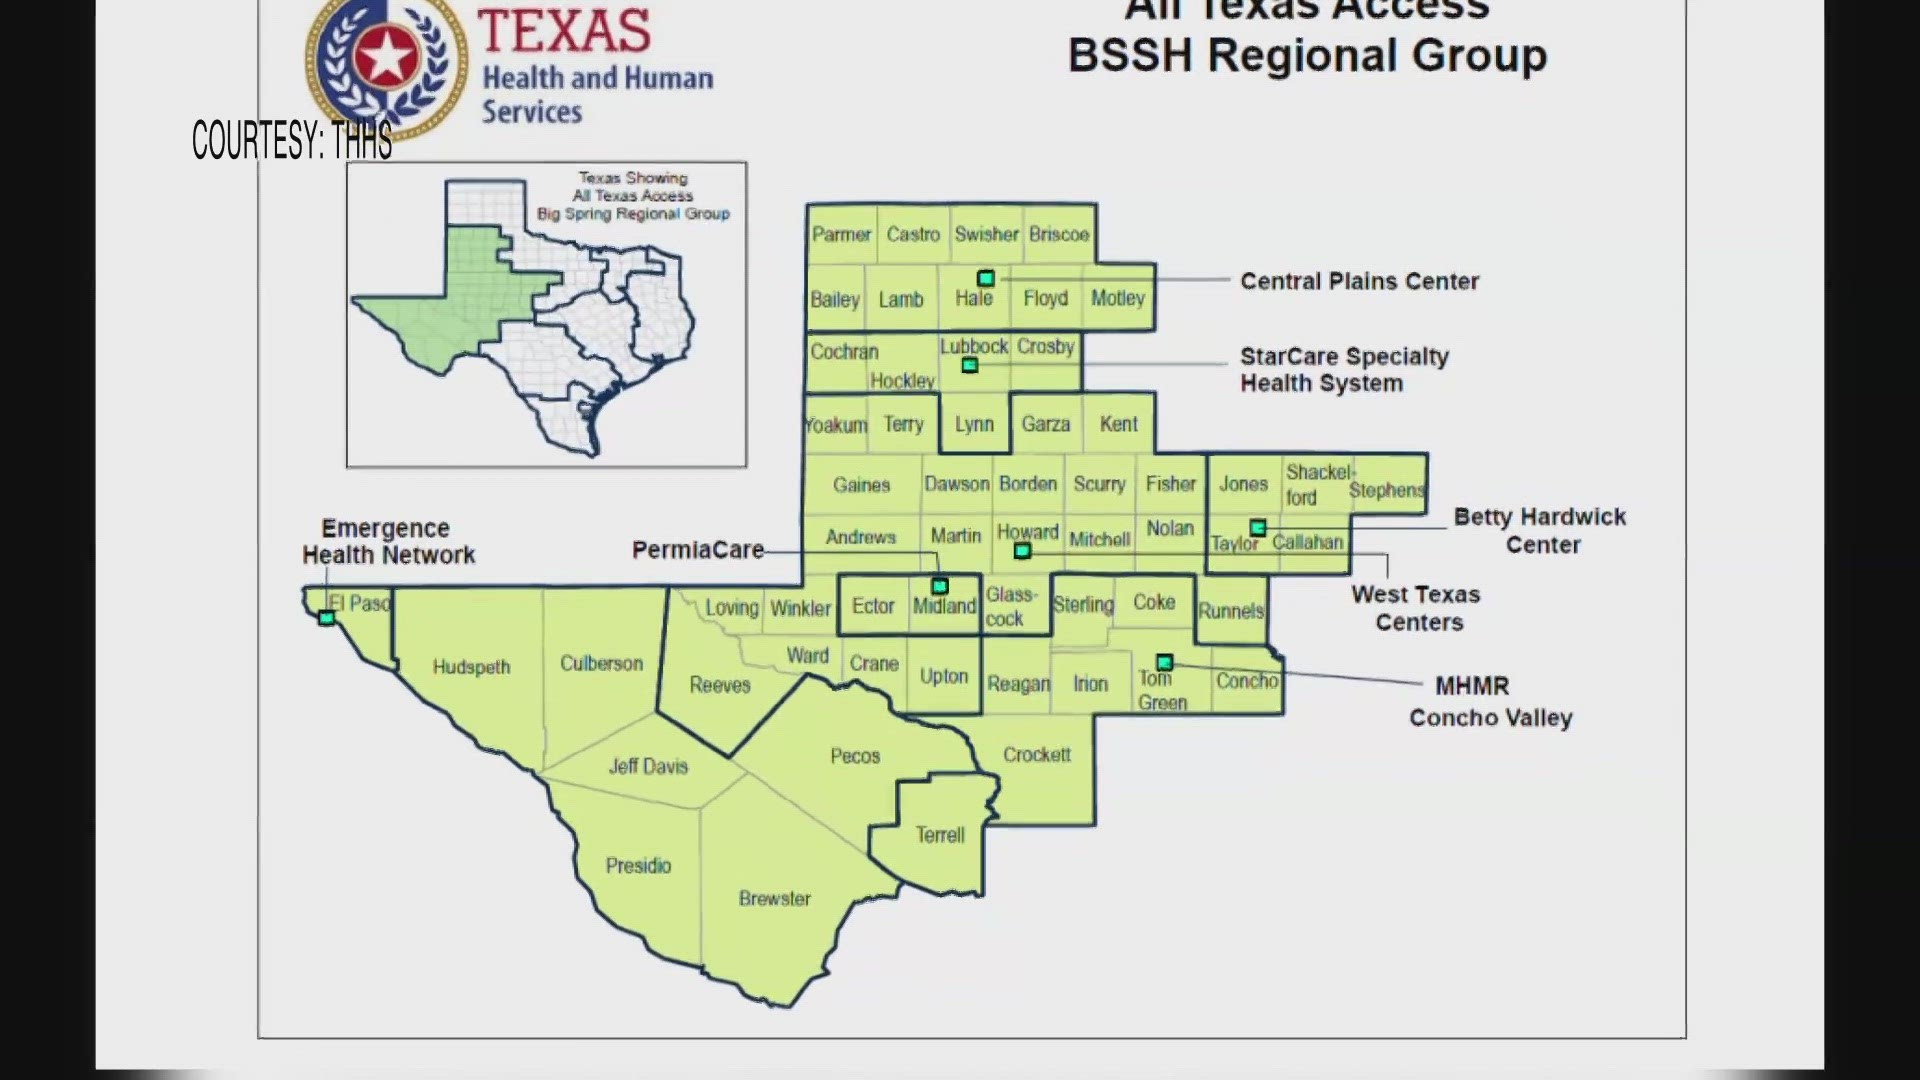 Texas Health and Human Services started a rural mental health initiative last year. While meeting with mental health centers, they revealed obstacles to overcome.